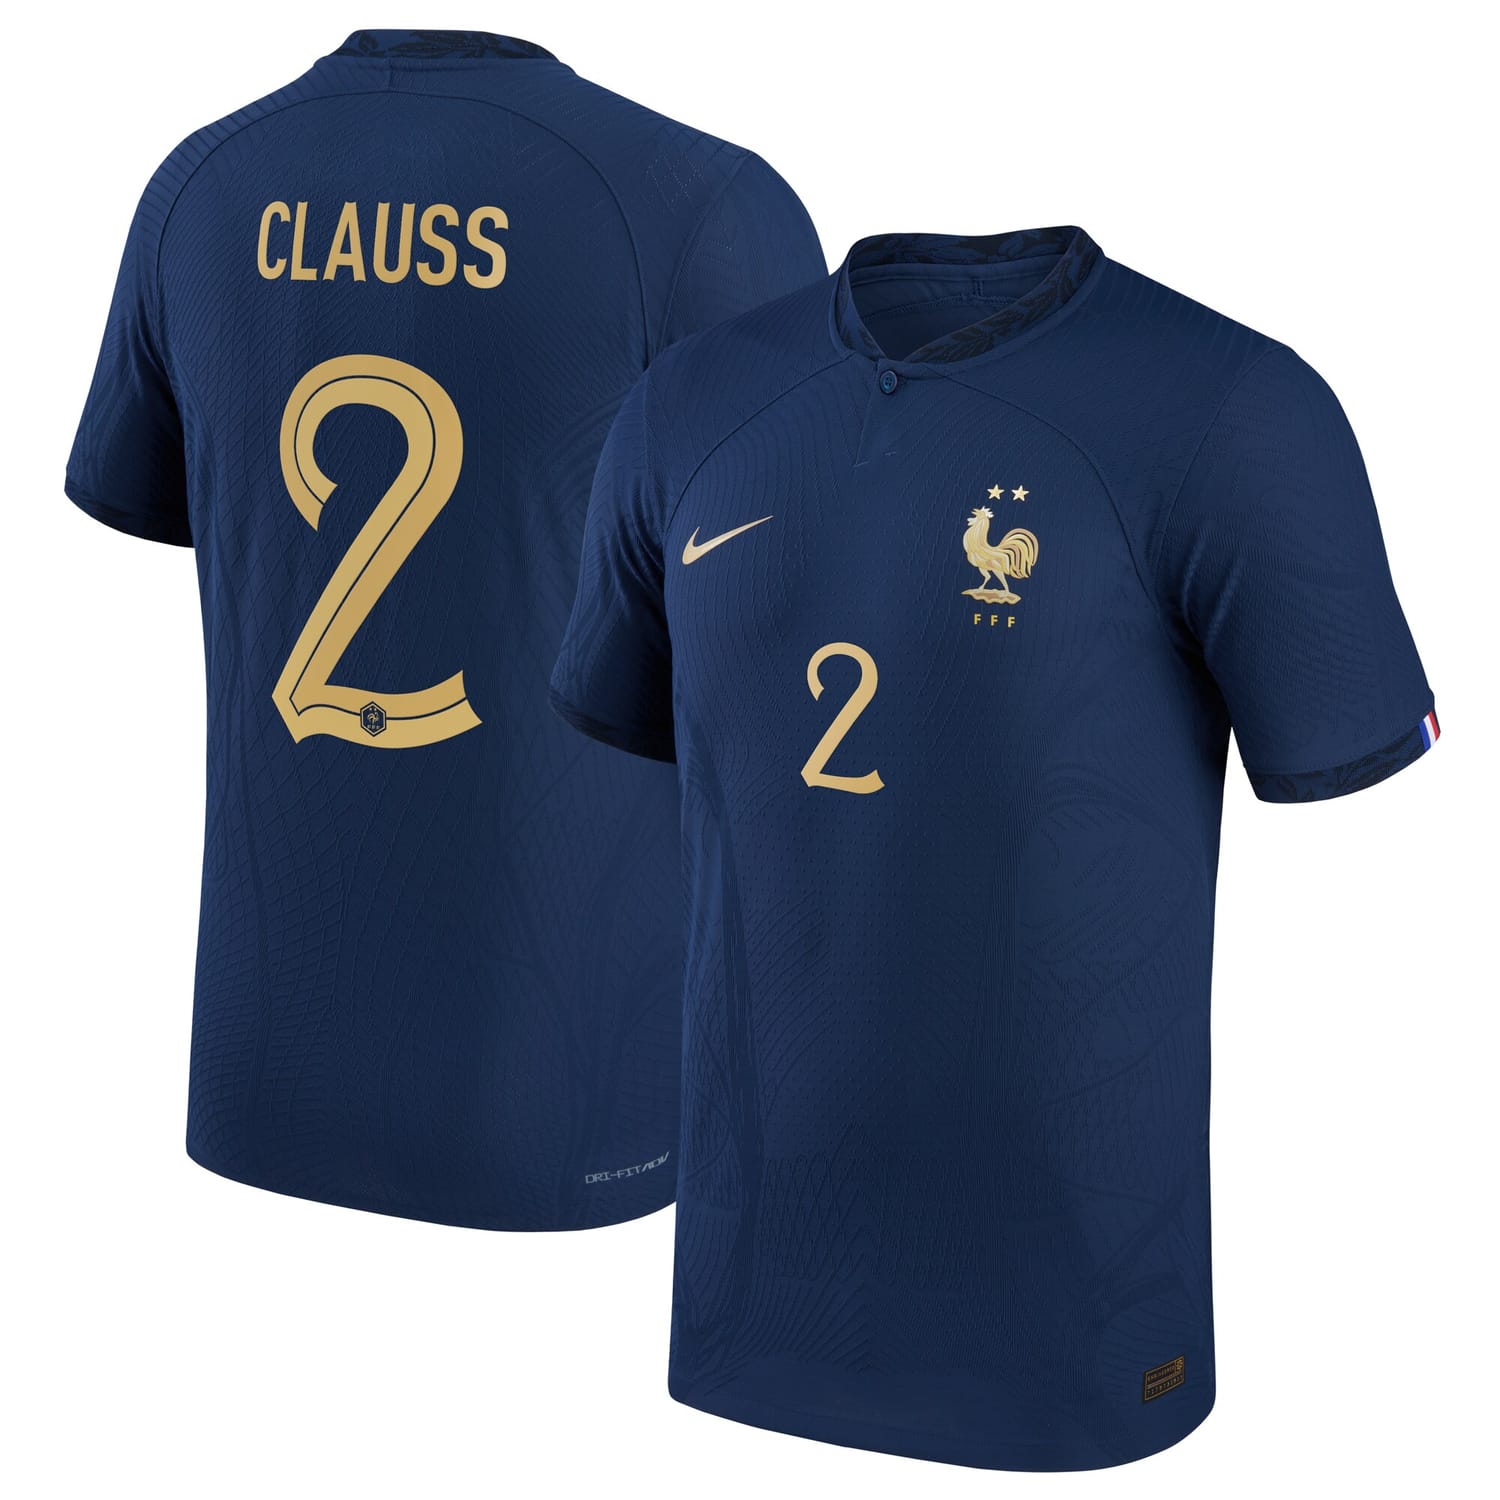 France National Team Home Authentic Jersey Shirt 2022 player Clauss 2 printing for Men